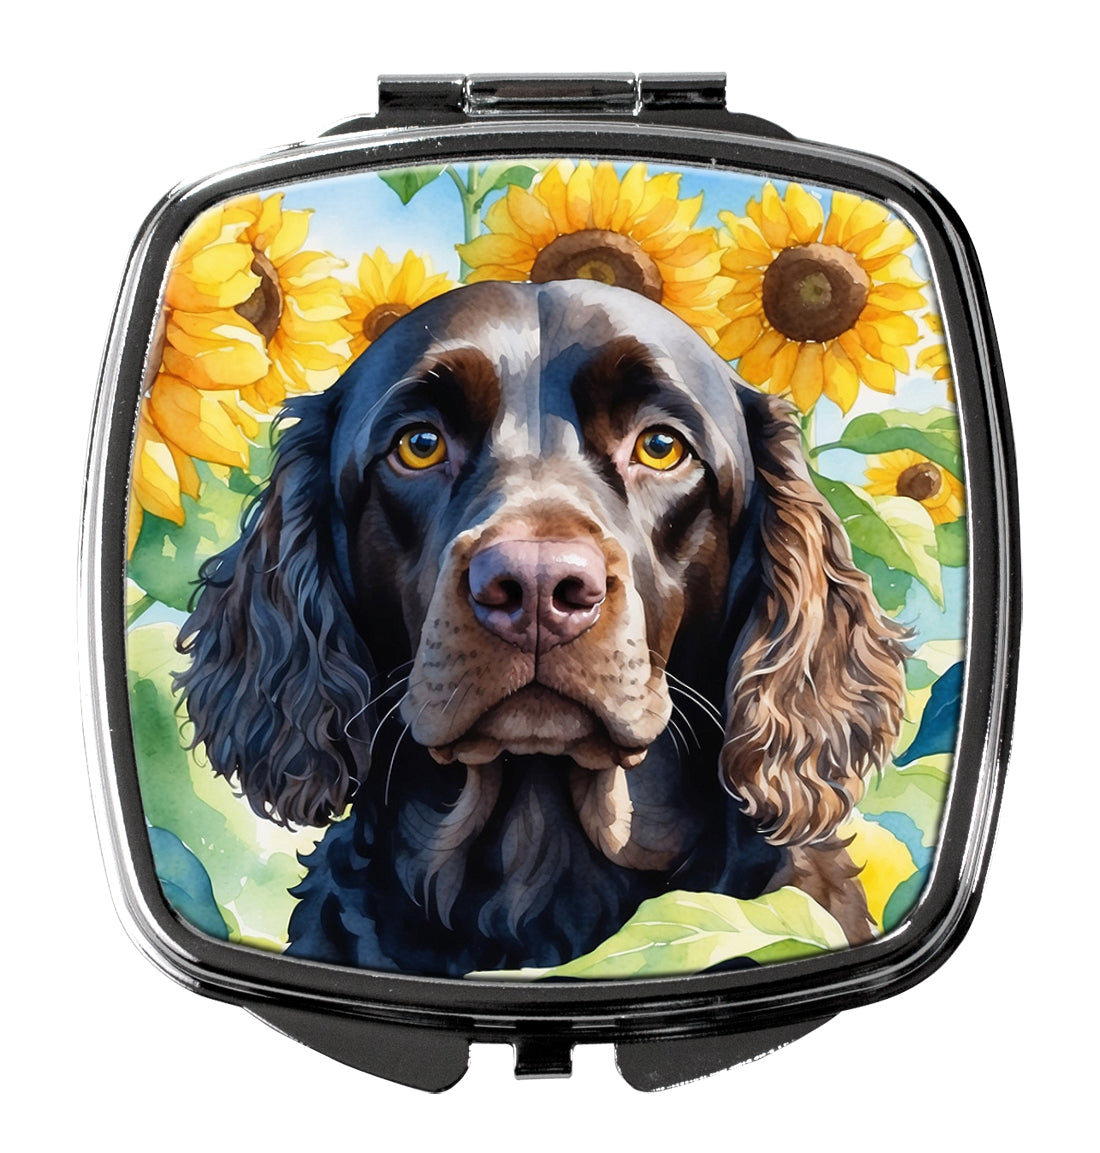 Buy this American Water Spaniel in Sunflowers Compact Mirror